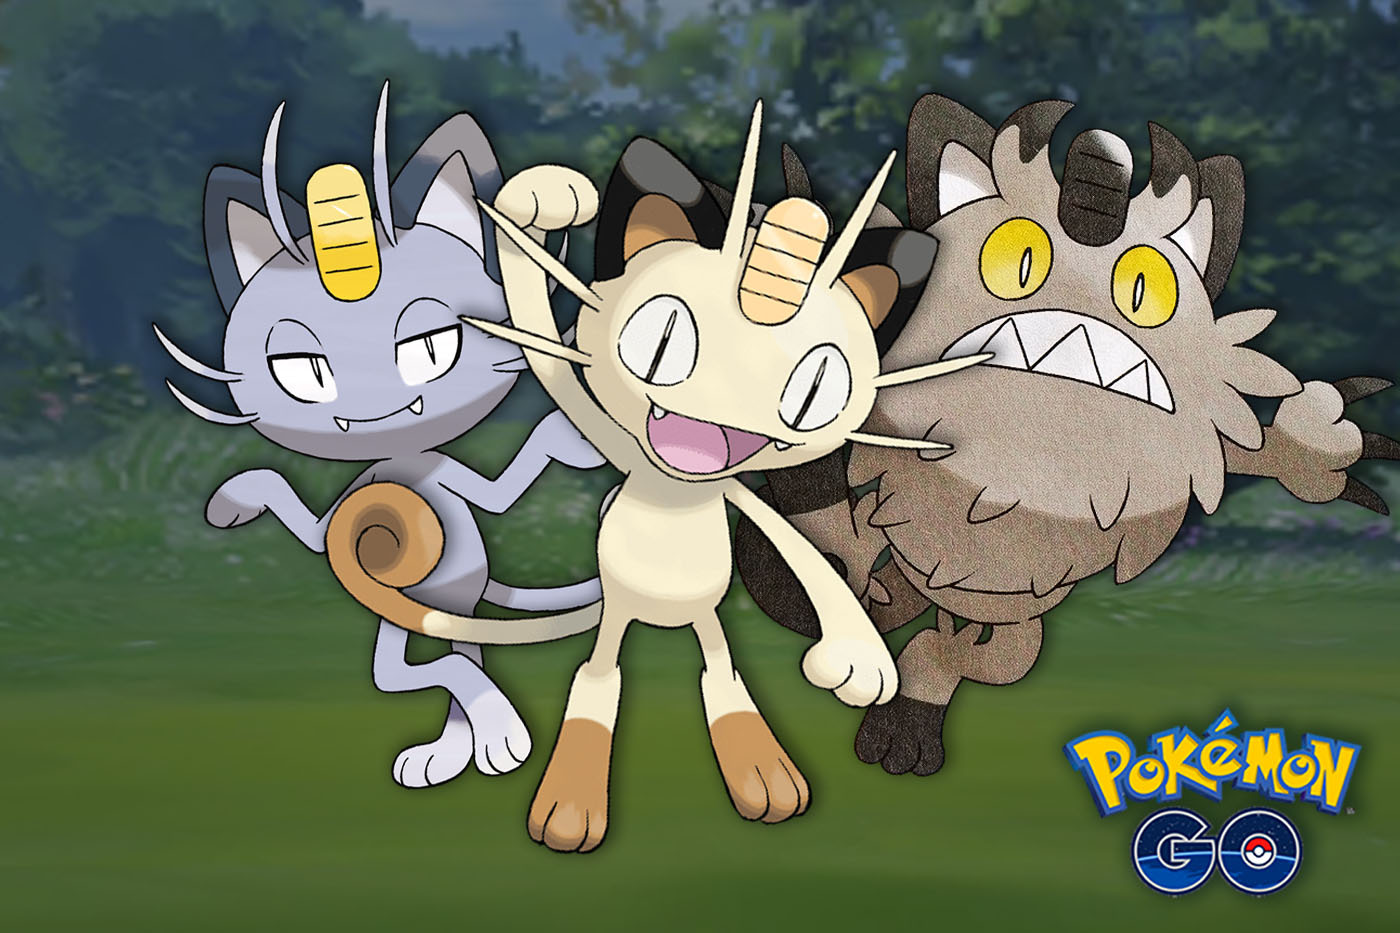 "Pokémon Go" Meowth Day Event: Start time, research tasks and mor...